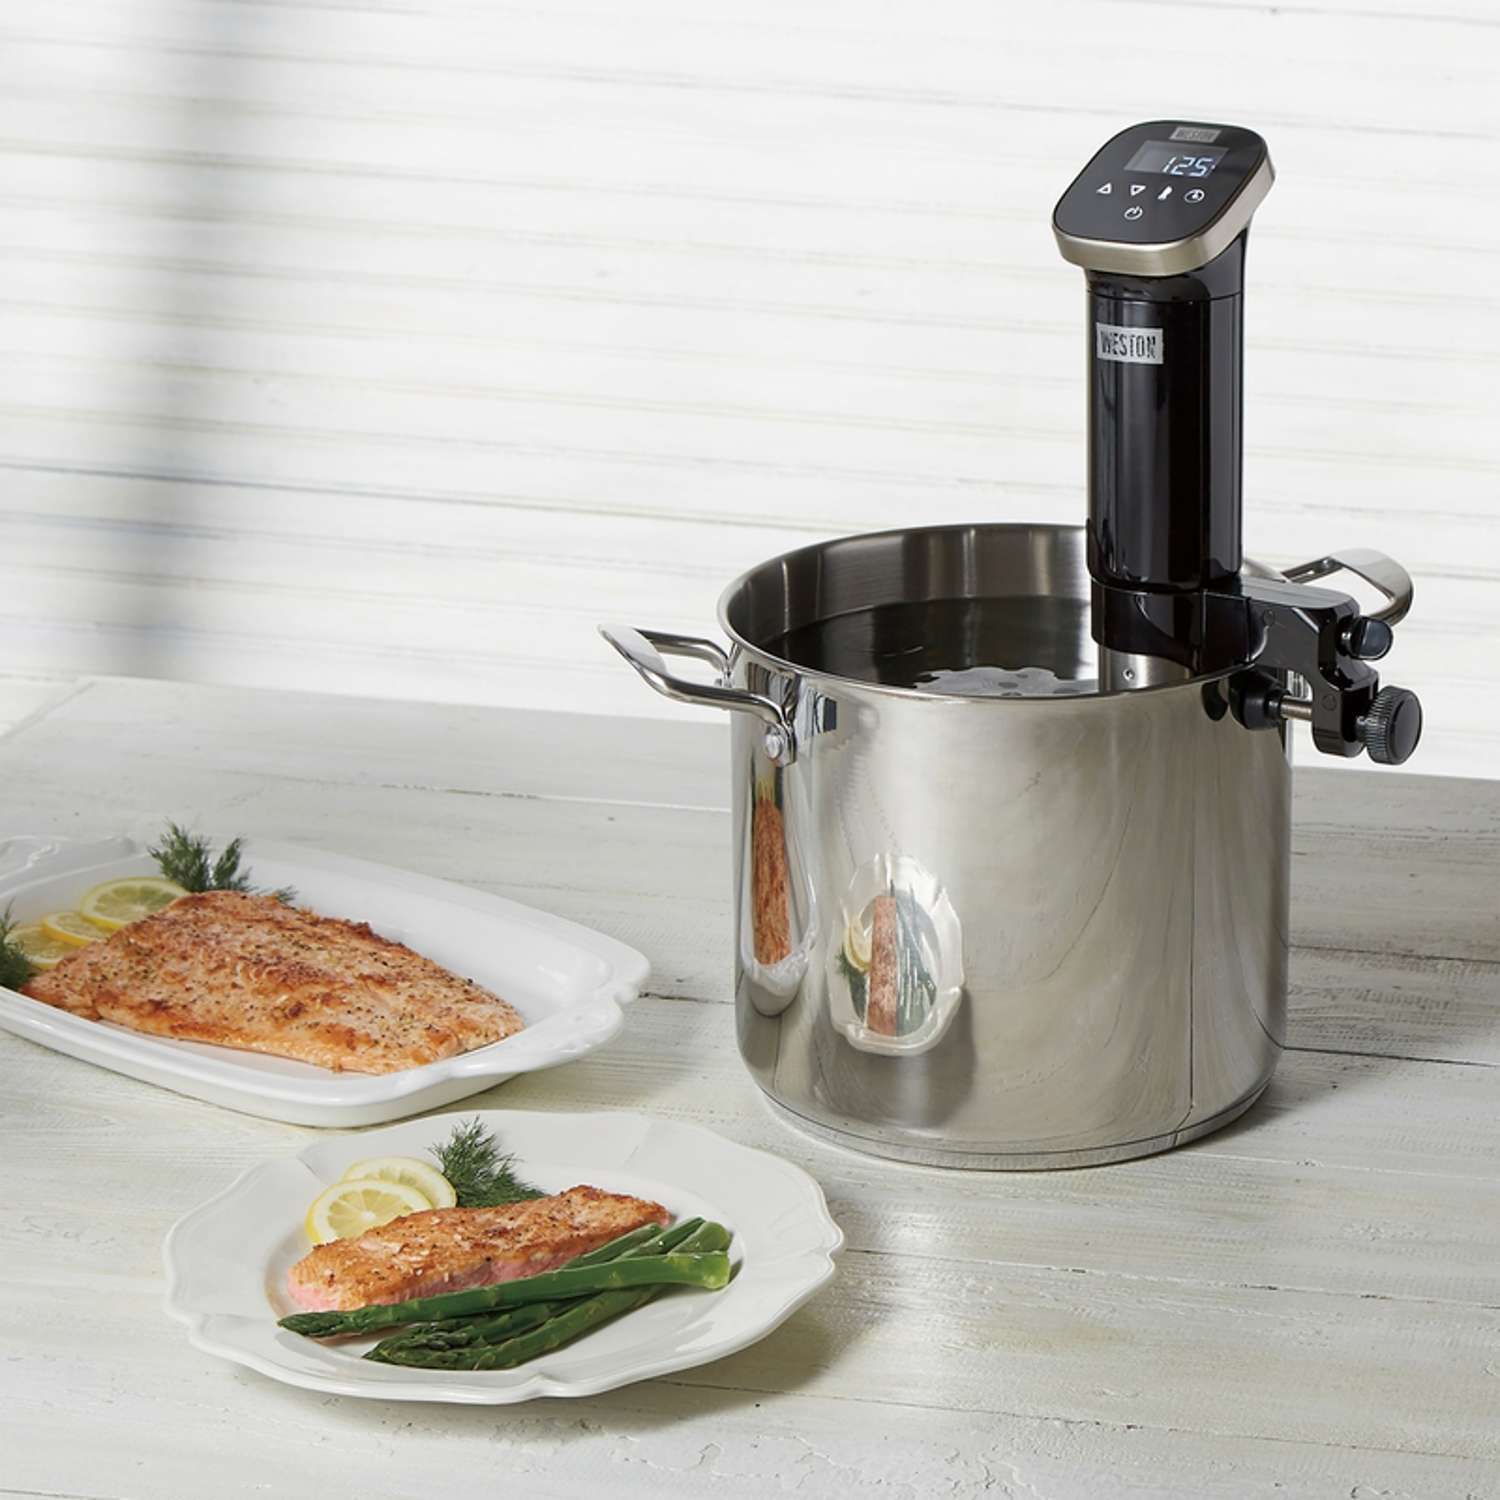 Weston 2-in-1 Smoker Slow Cooker Overview 